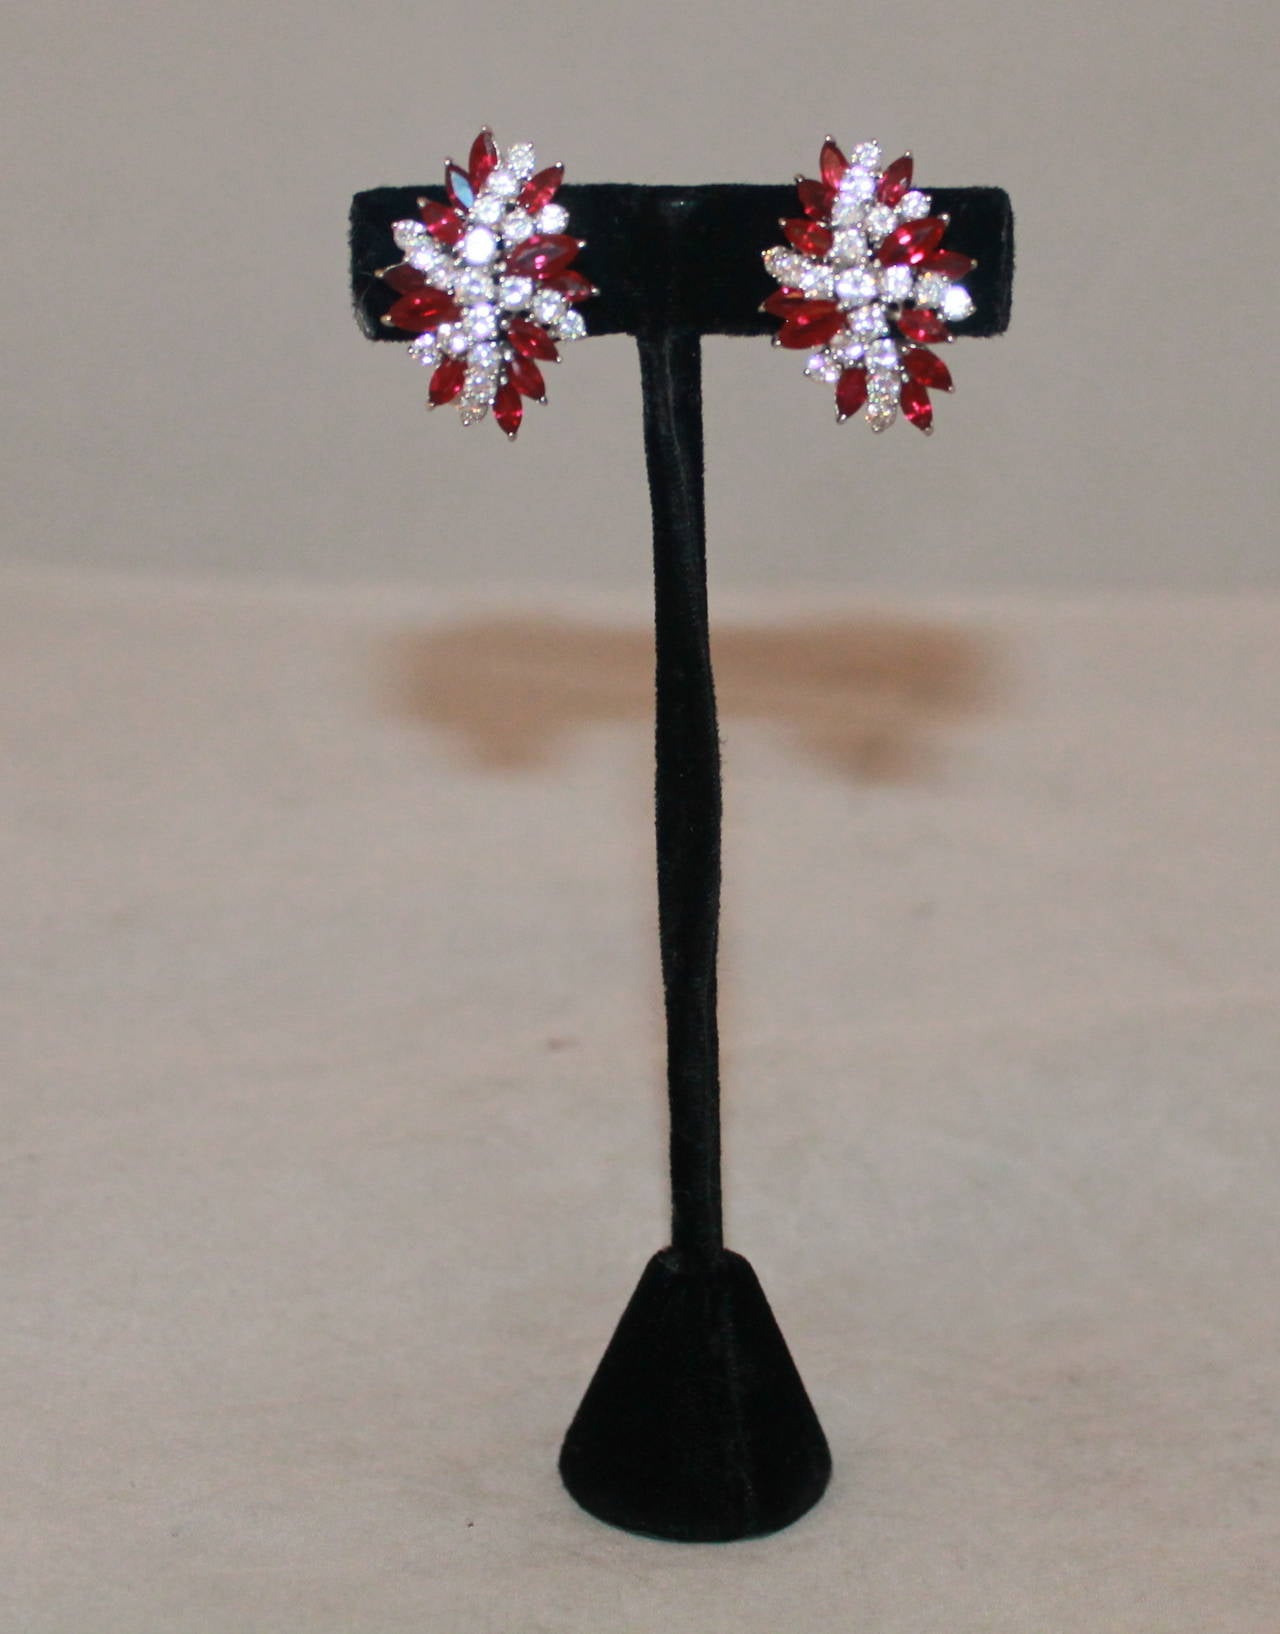 Mariko Sterling Silver Ruby Tone and Rhinestone Vine Clip On Earrings in Excellent Condition. 

Measurements: 
Length: 1.5 